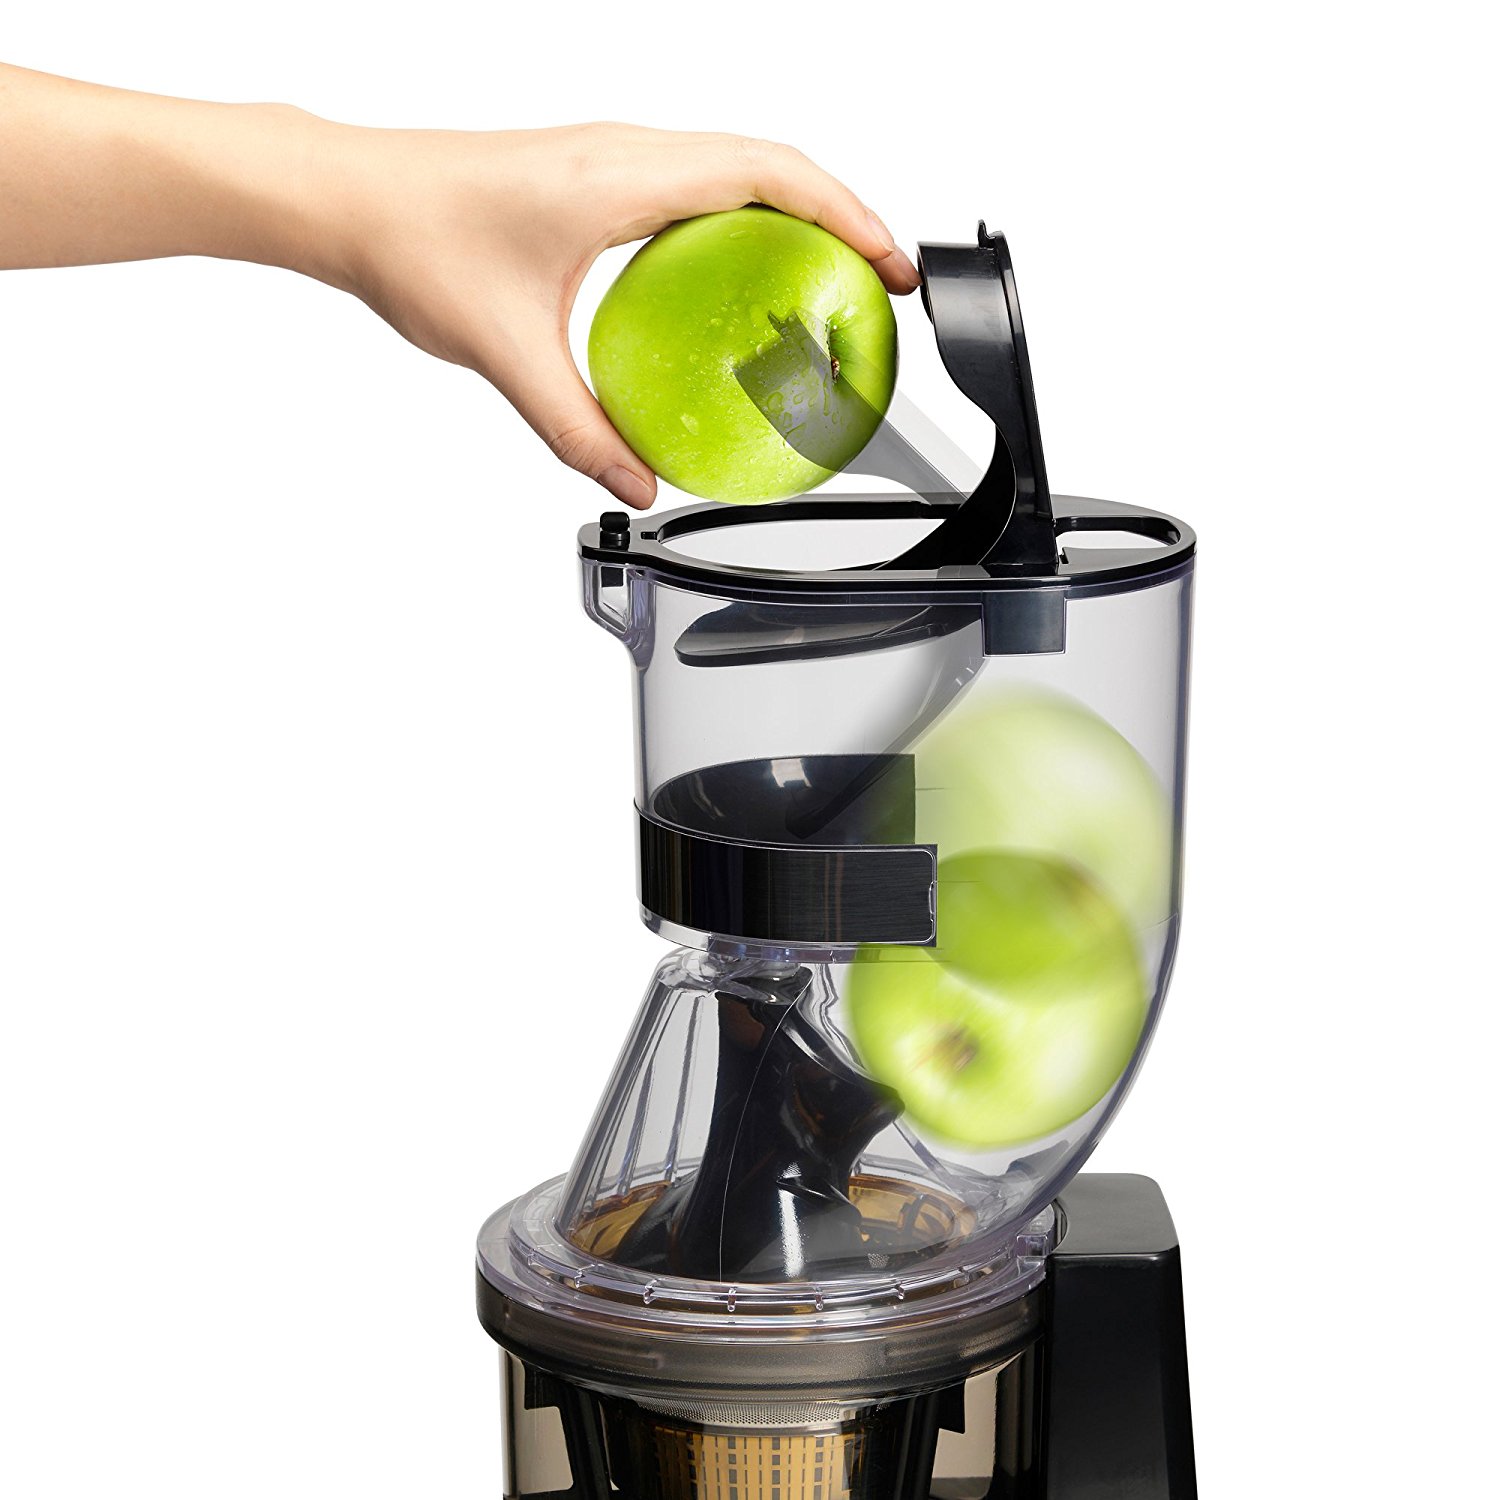 KUVINGS JUICER COUPON